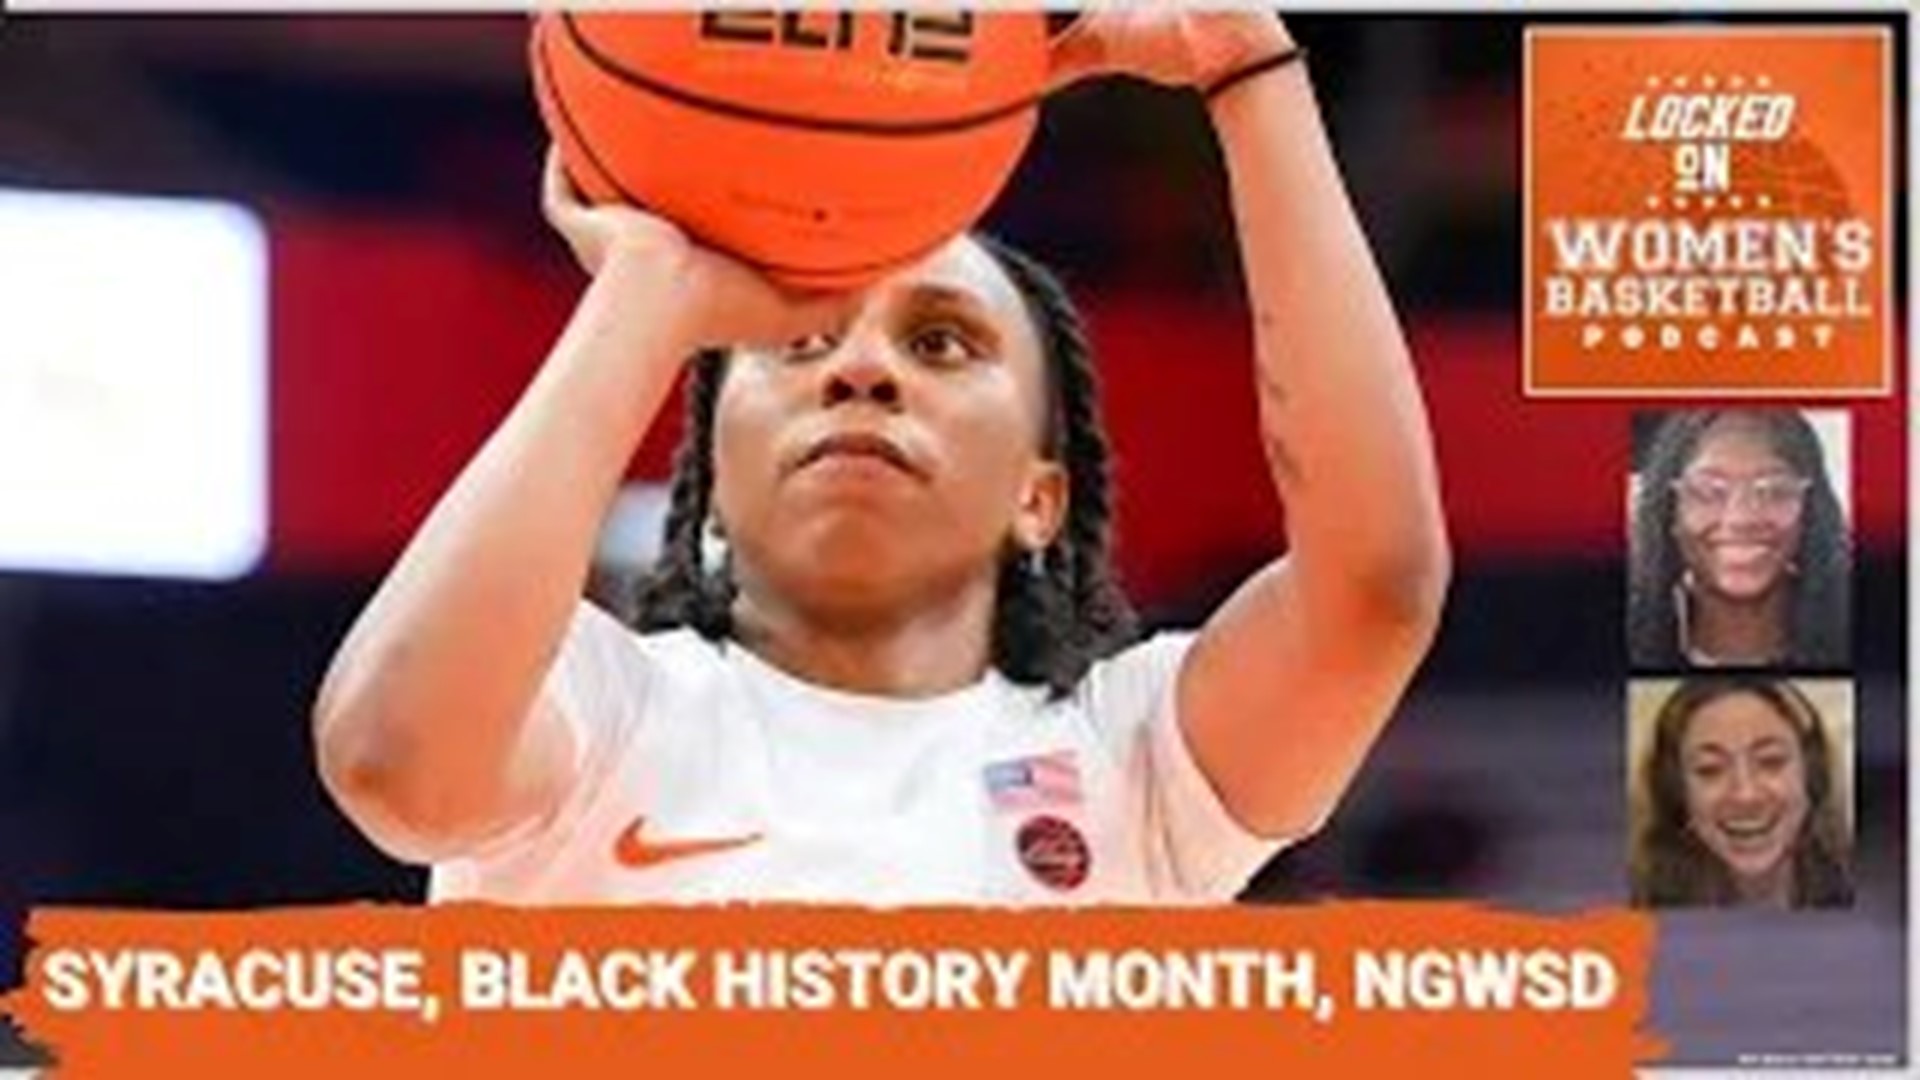 Isis Young is a basketball analyst, sideline reporter, and now is CEO of Your World Media. She joins host Gigi Speer to talk about Syracuse Basketball, Black History